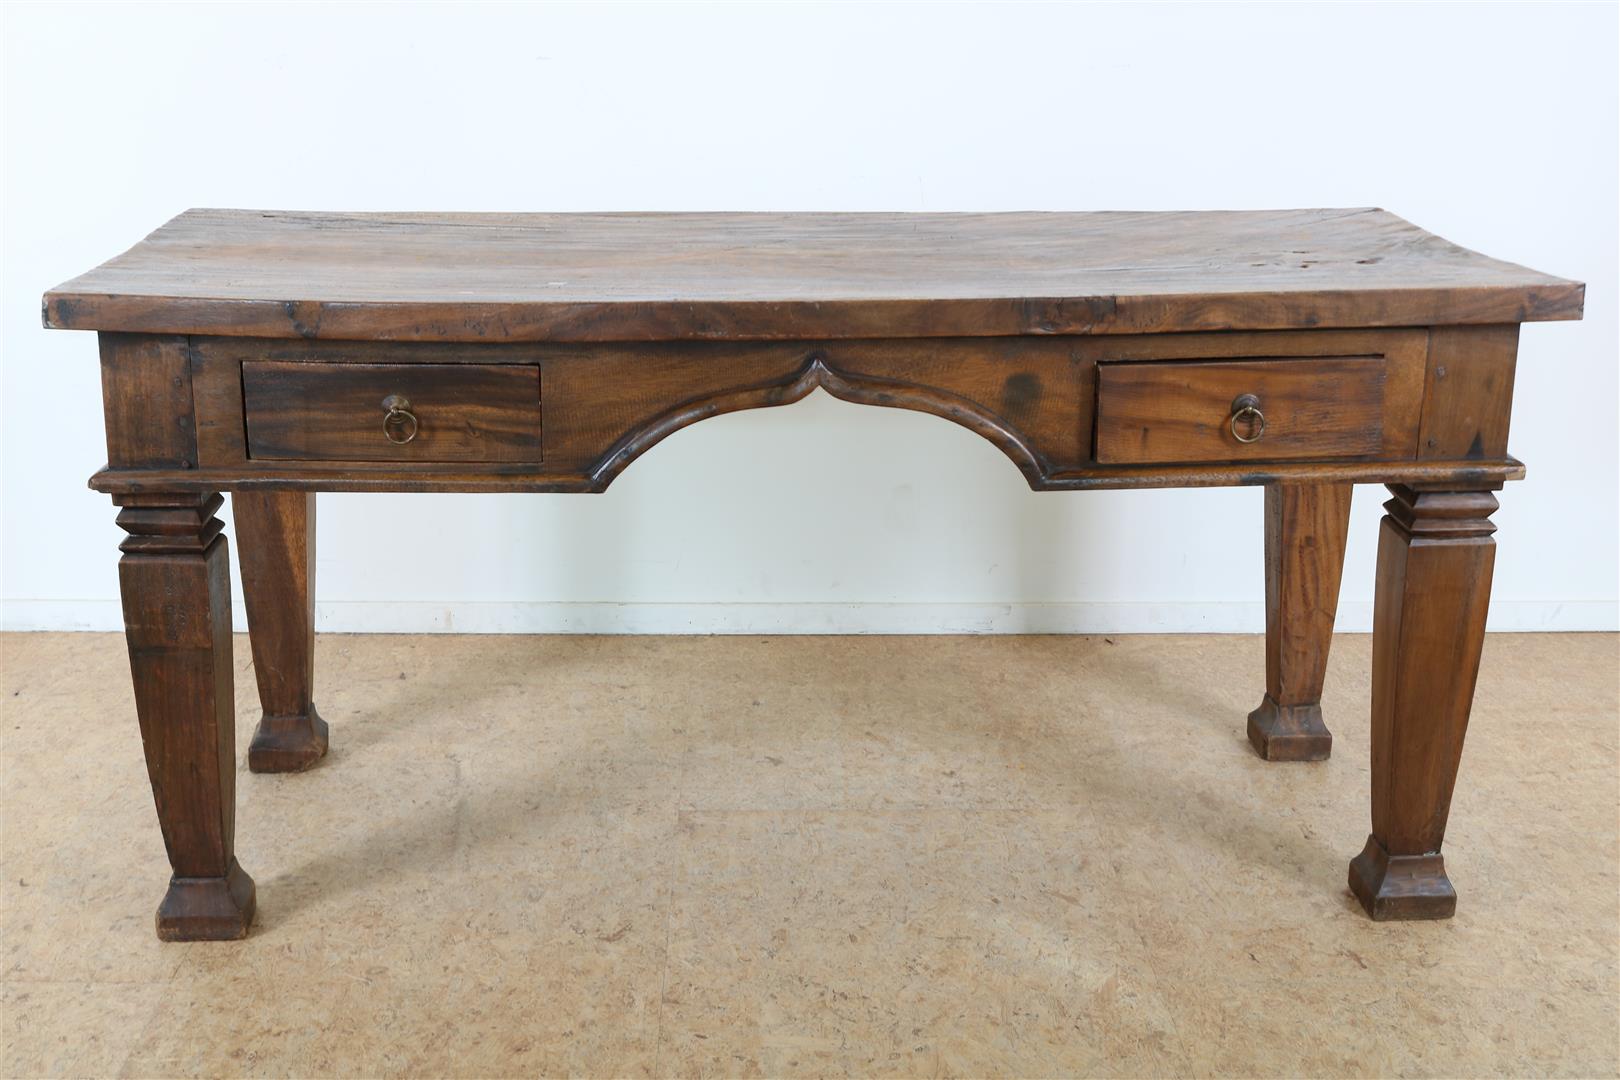 Teak table desk with 2 drawers on tapered legs, Indonesia, 83 x 175 x 73 cm.